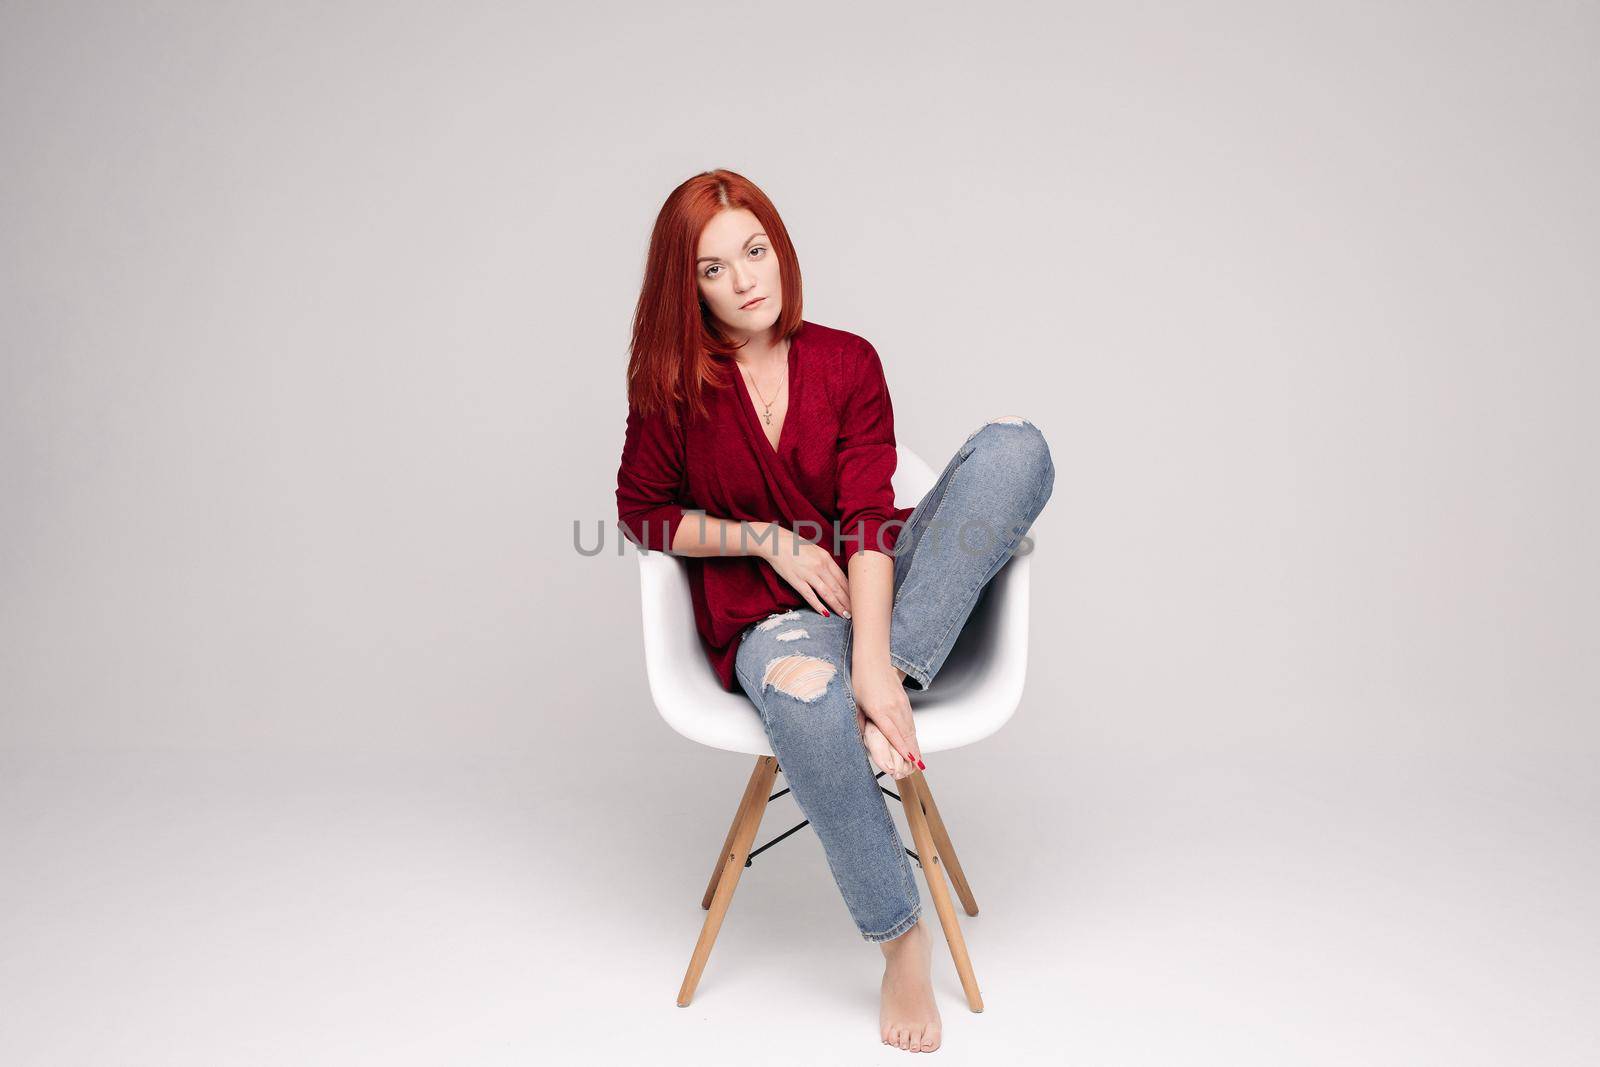 Model with ginger hair sitting on white chair in studio. by StudioLucky